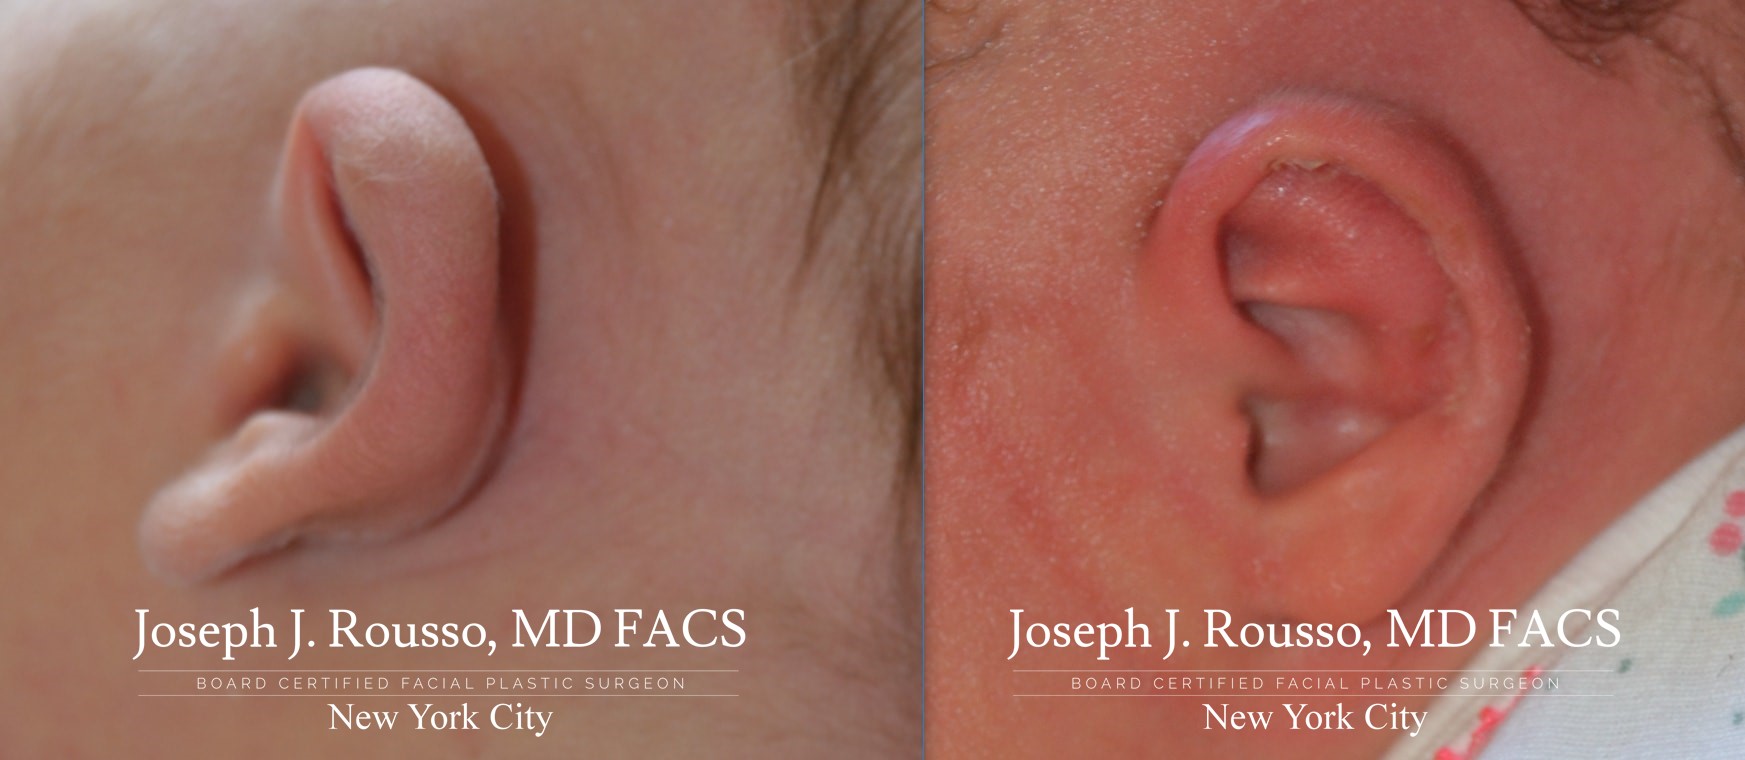 Protruding Ears - Prominent Ears - Earwell™ Infant Ear Correction System